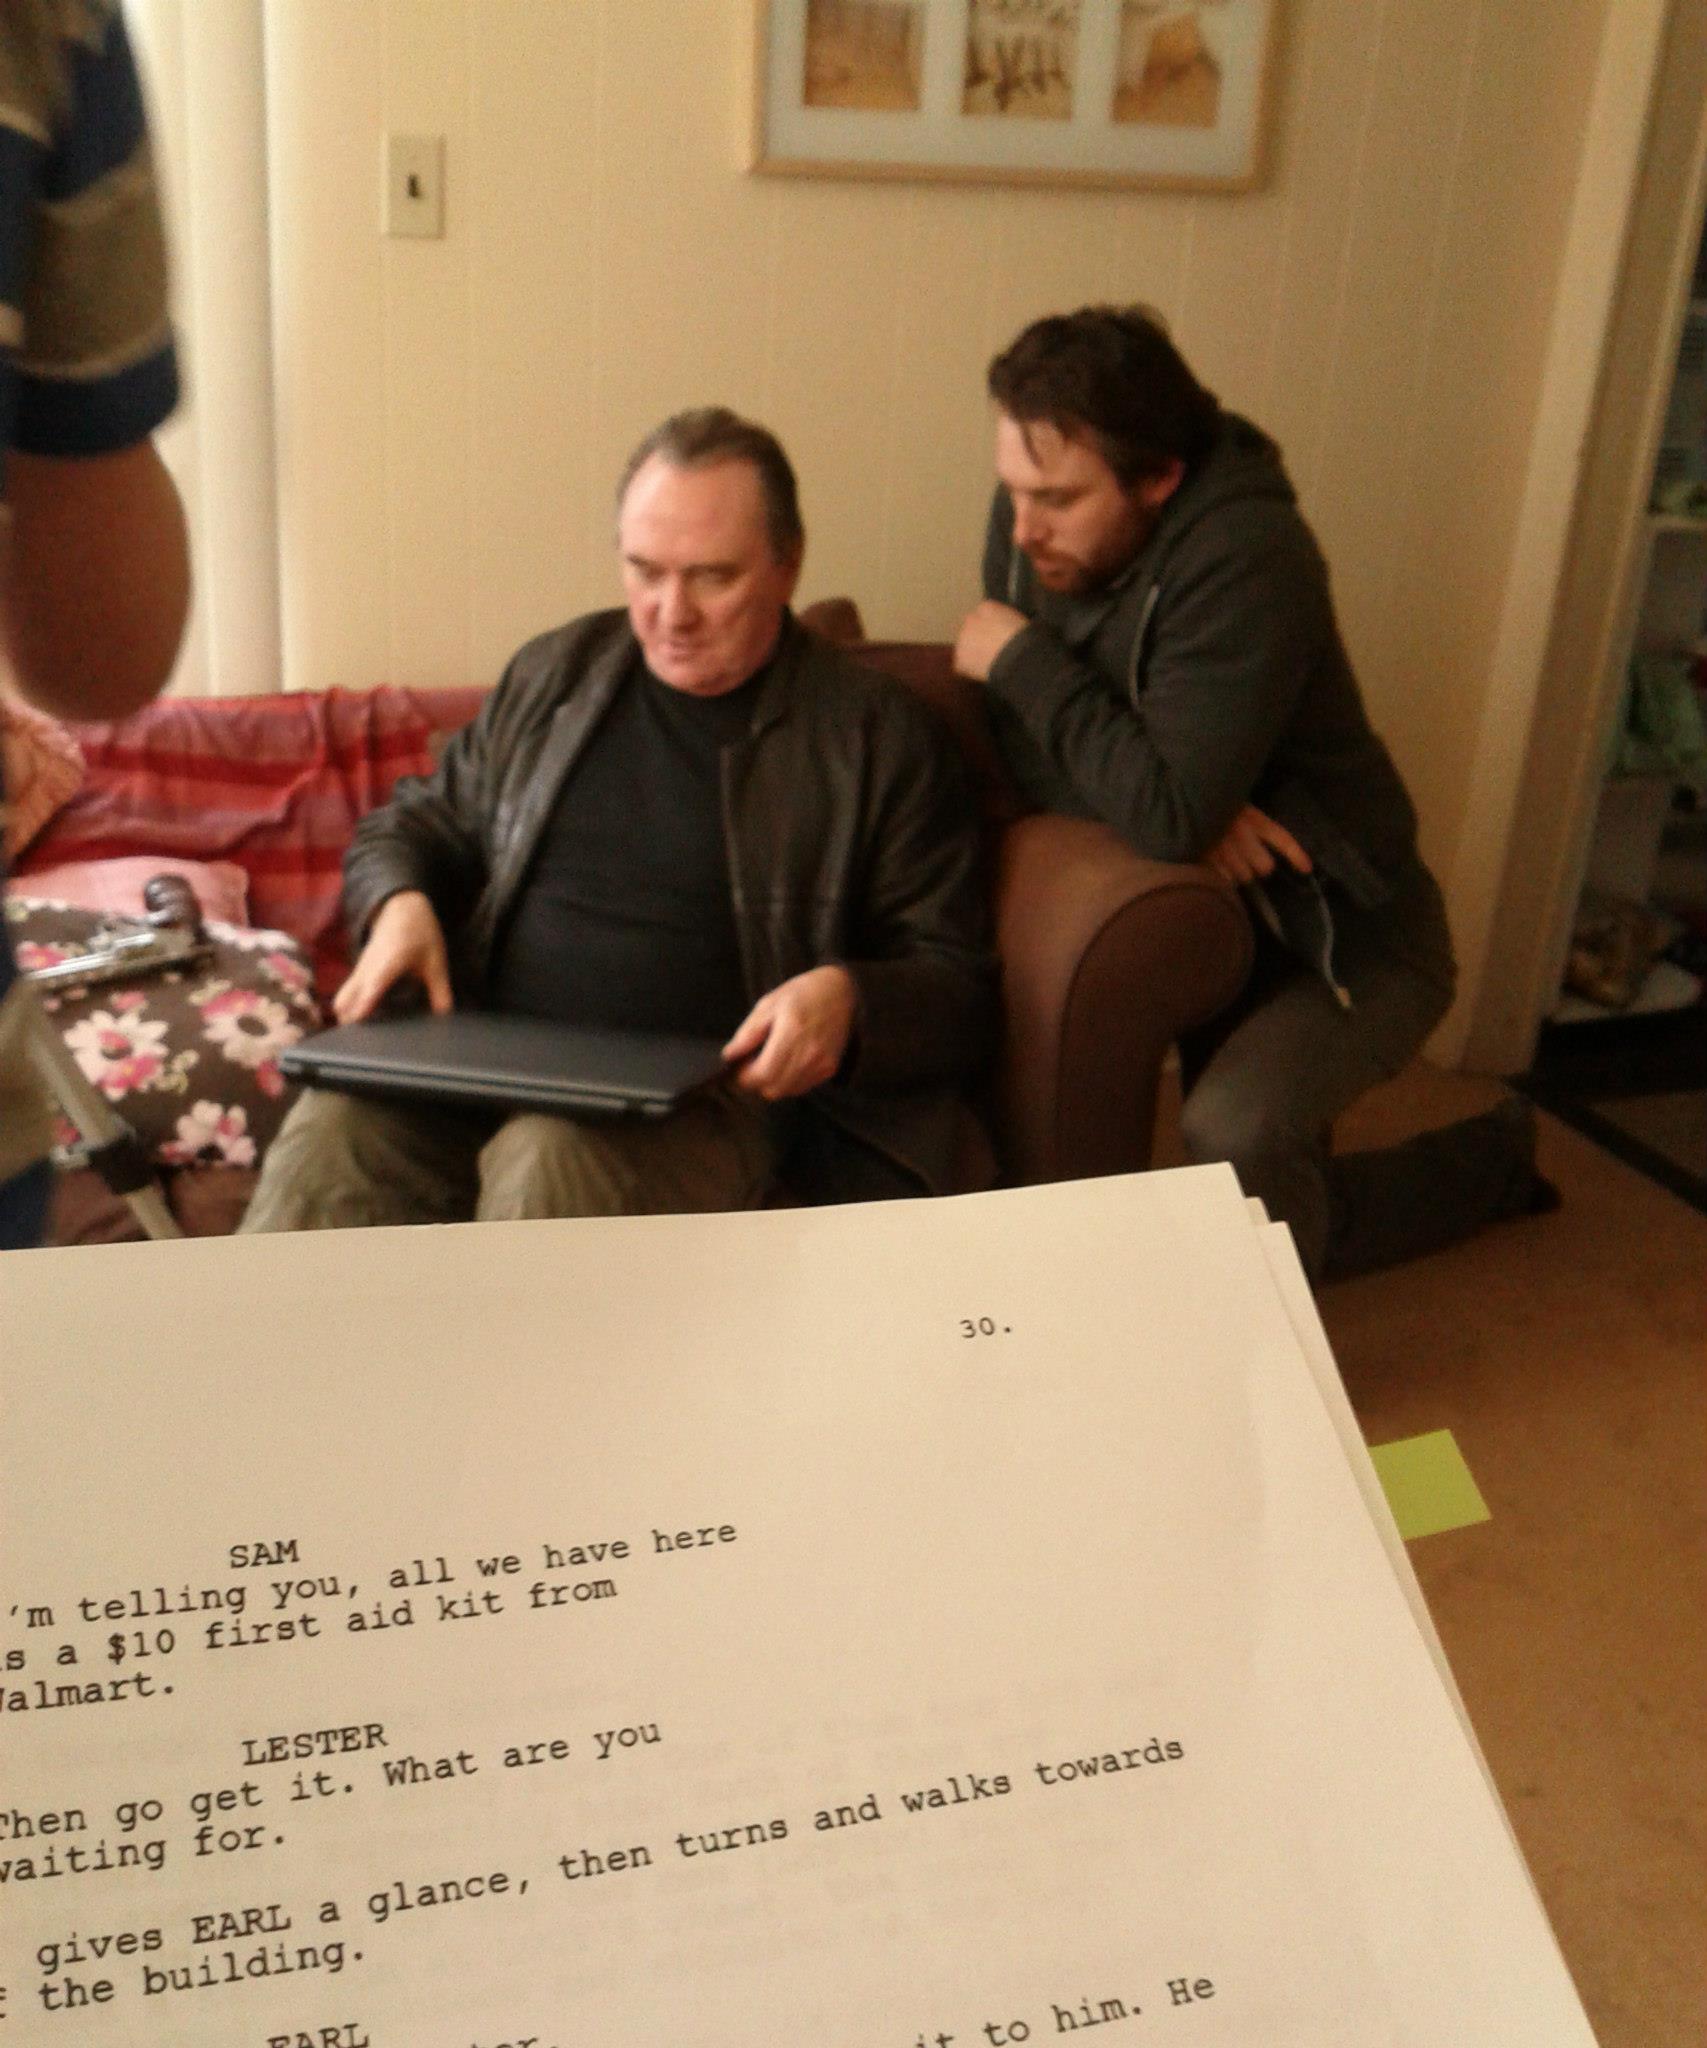 Al Dales (Earl) and Conor Gomez (Lester)rehearse in this Behind the scenes photo of the award winning 2014 feature thriller 'Babyshower'.